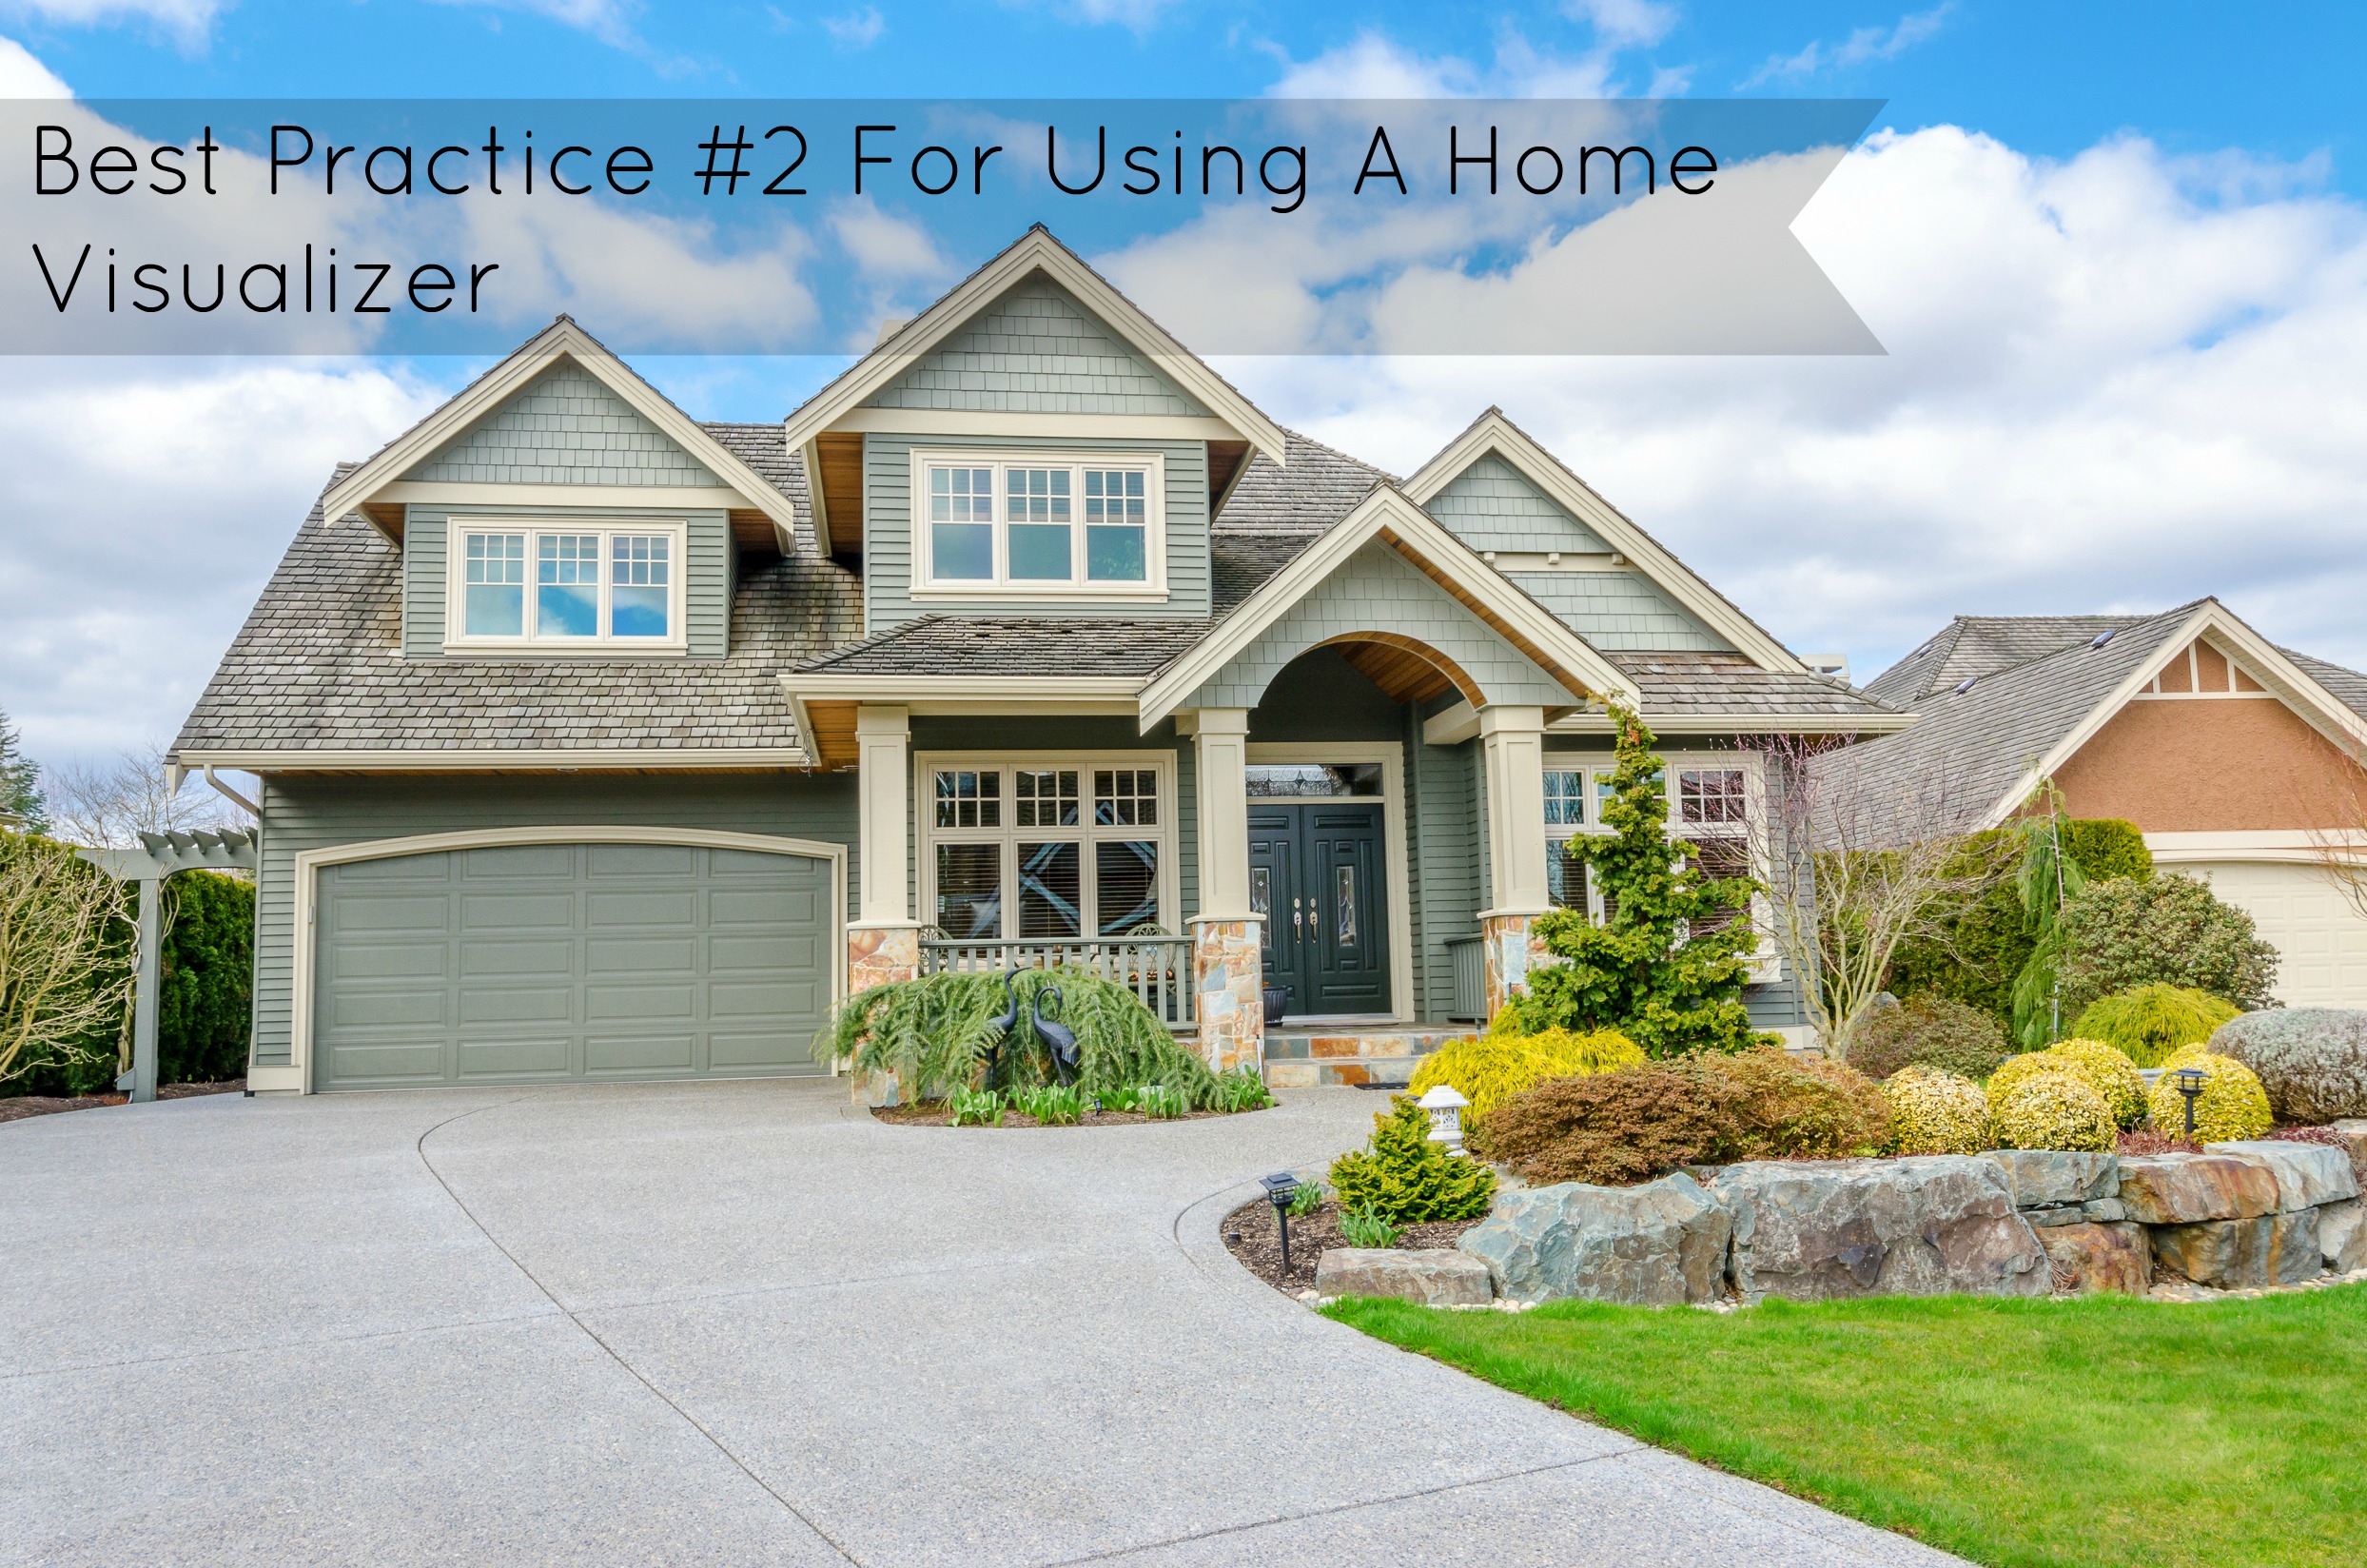 Best Practice #2 For Using A Home Visualizer